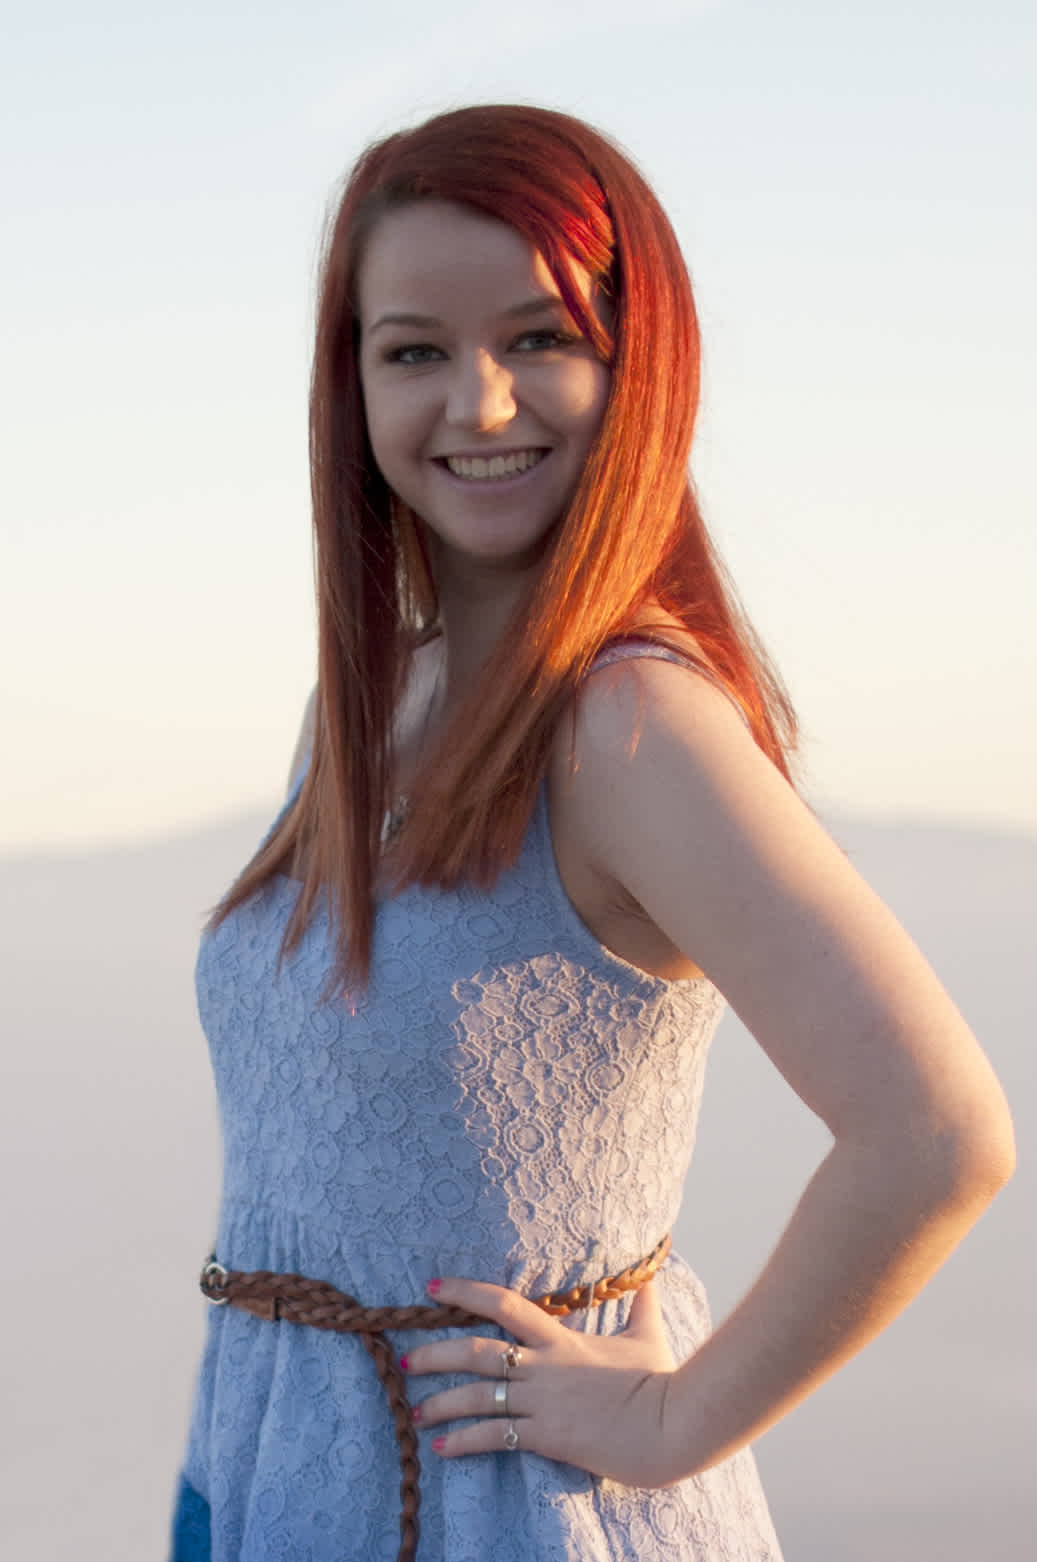 Girl with red hair in sunlight.